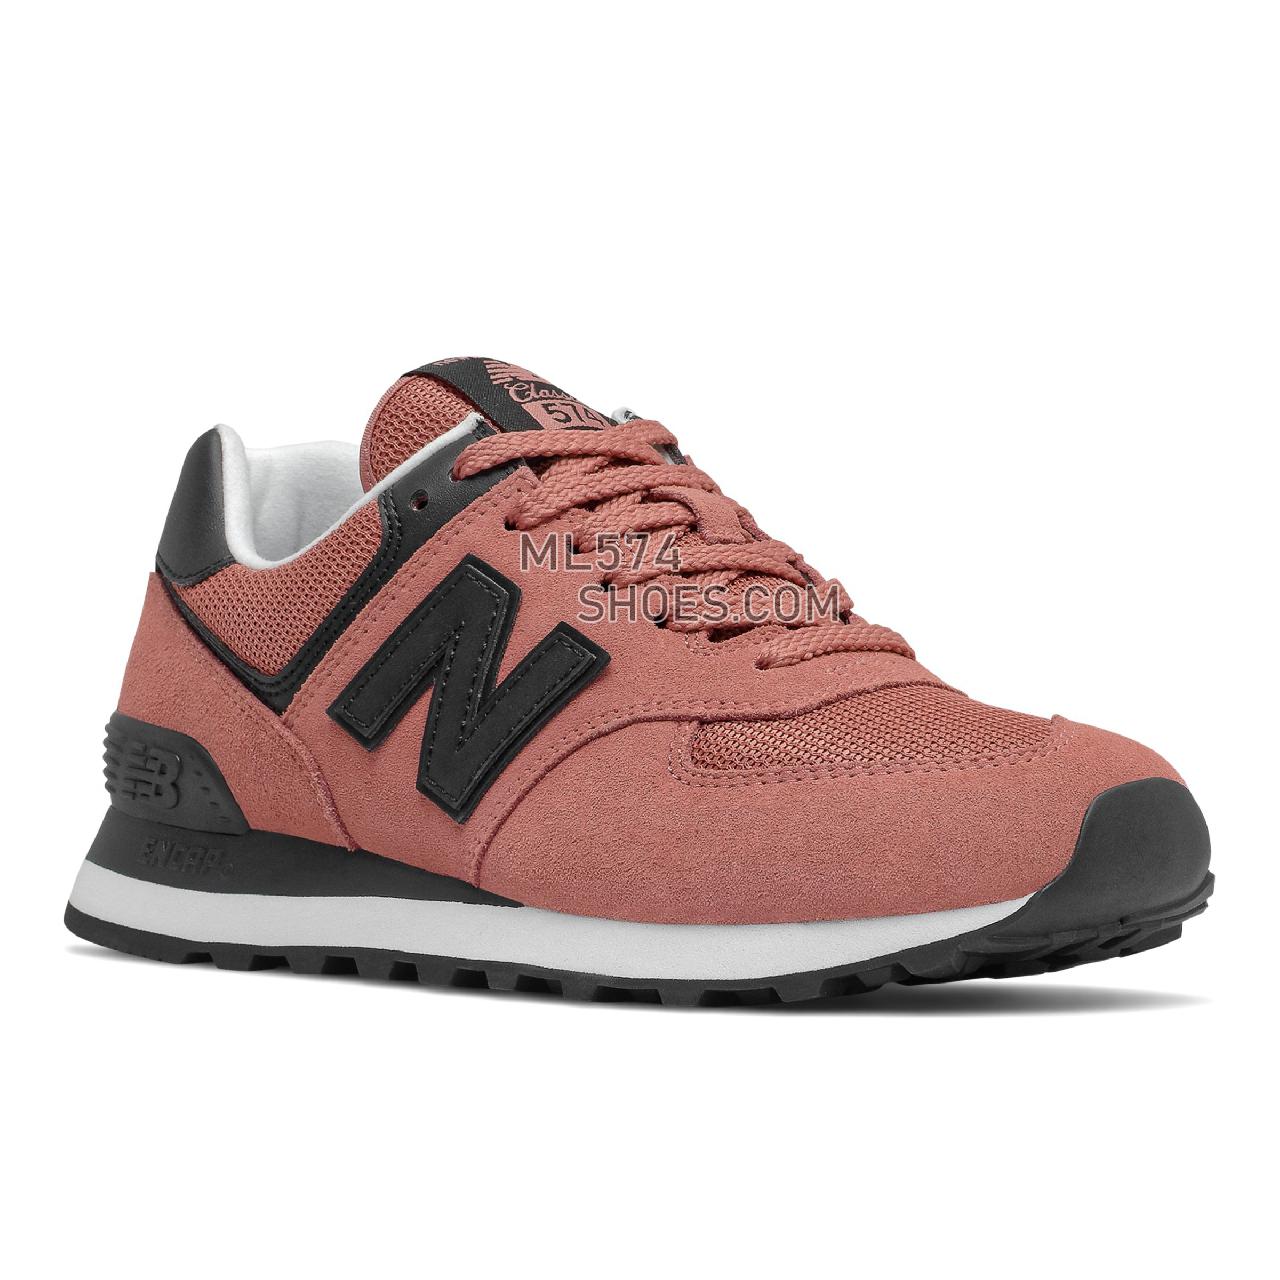 New Balance 574 - Women's Classic Sneakers - Washed Henna with Black - WL574MD2